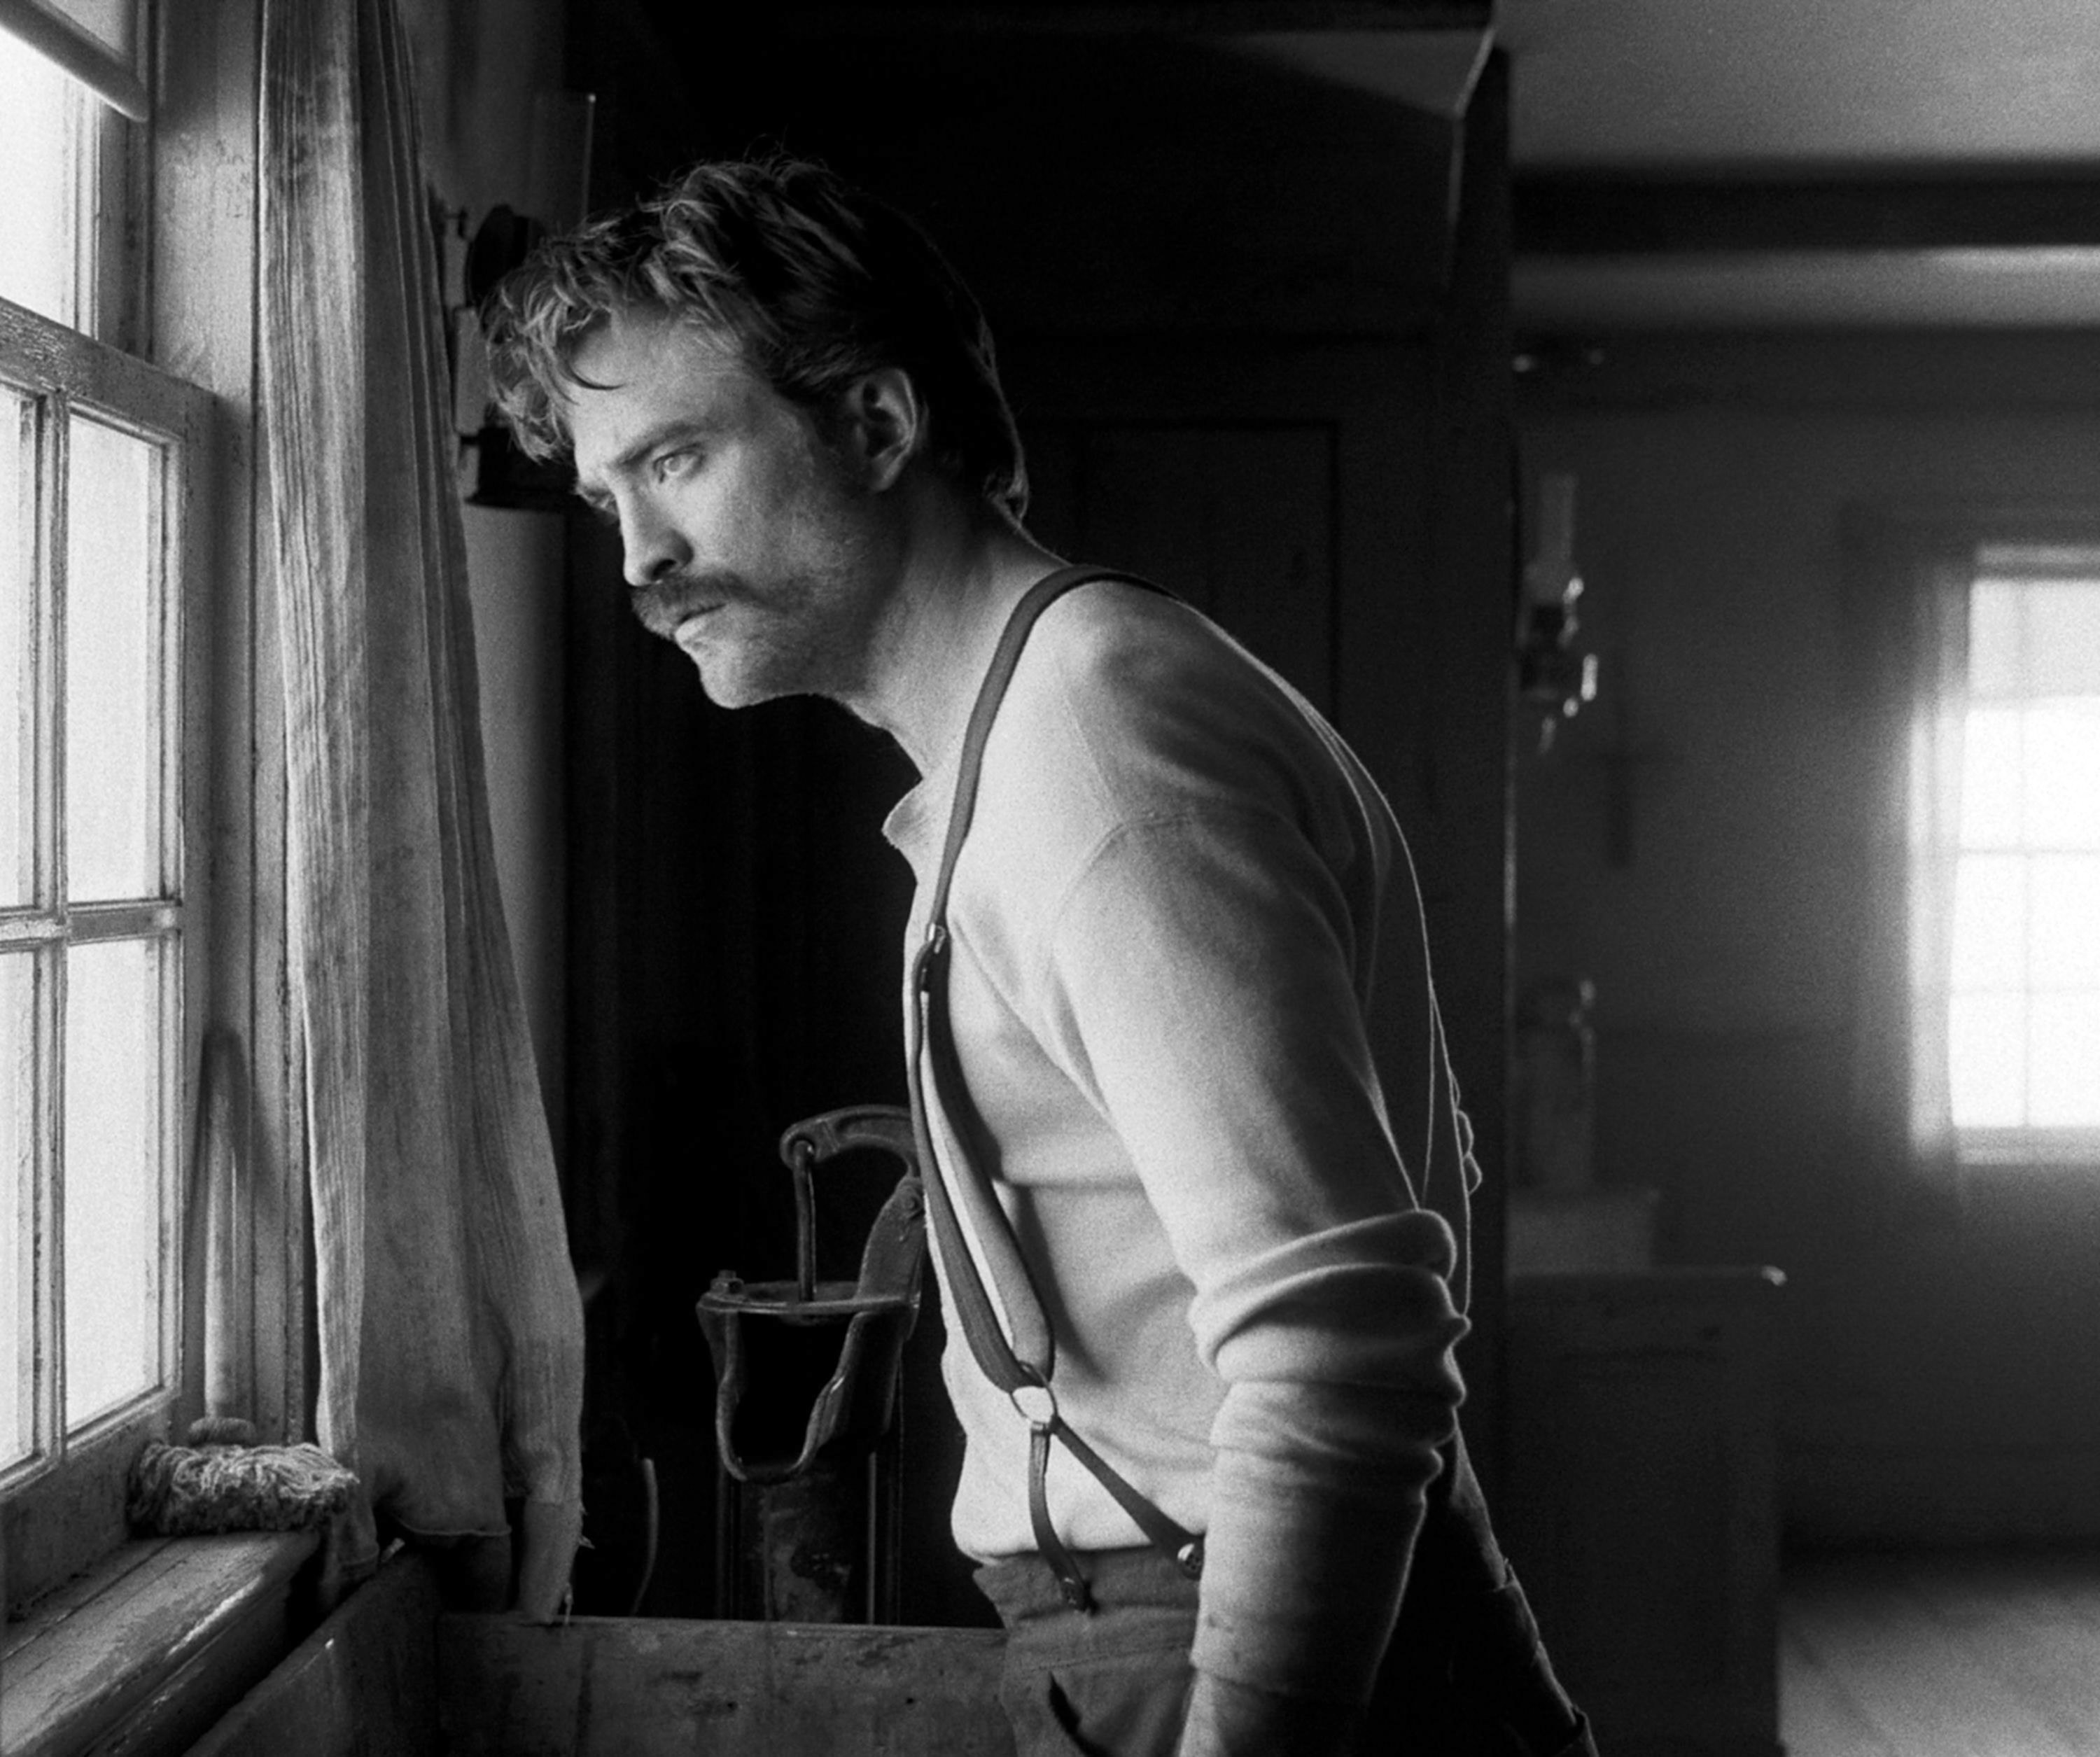 Black-and-white image of Robert with a mustache, wearing suspenders, and looking out a window